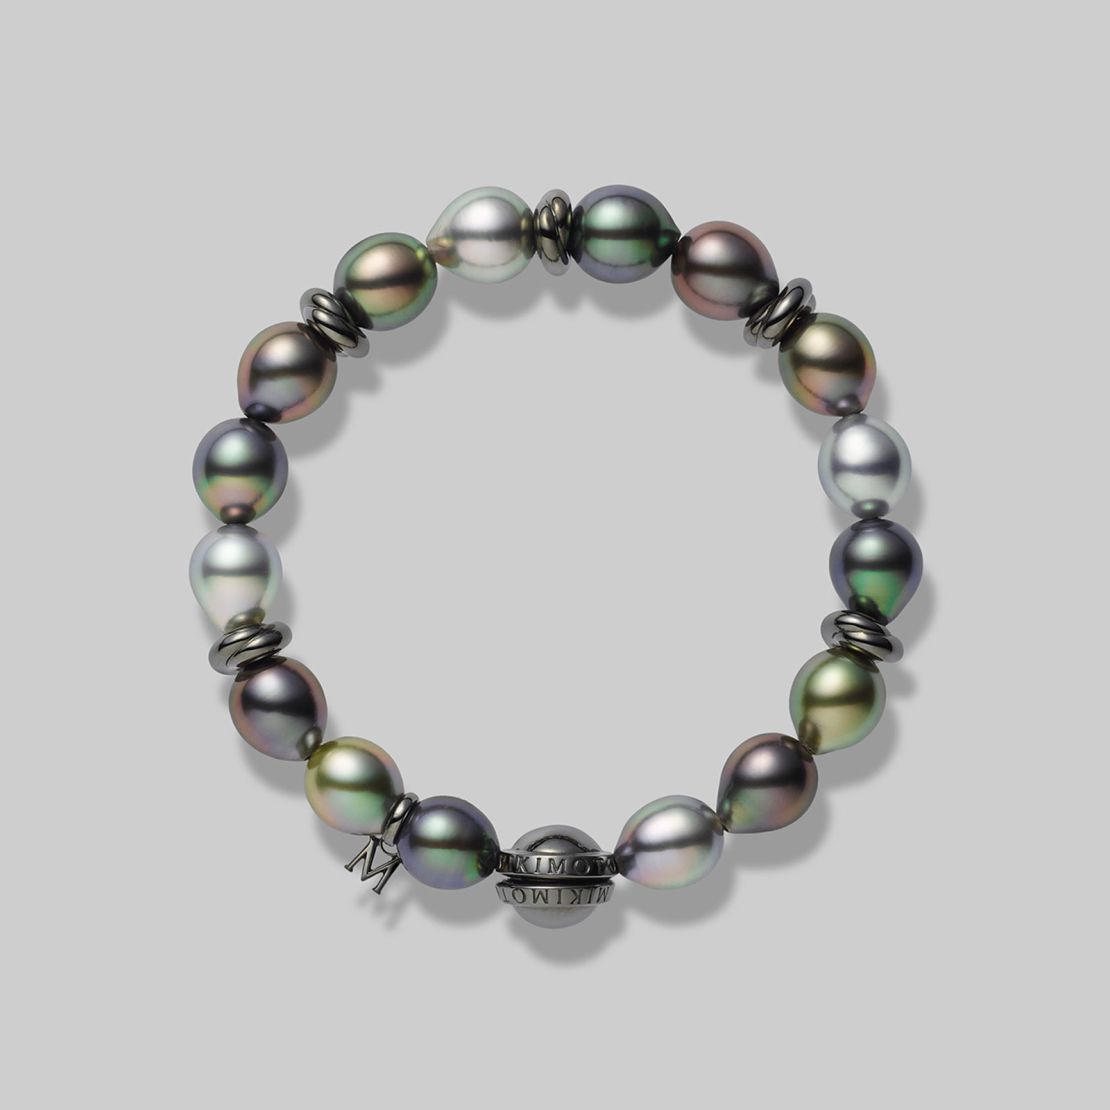 Mikimoto's edgier jewelry for men features Black South Sea cultured pearls.